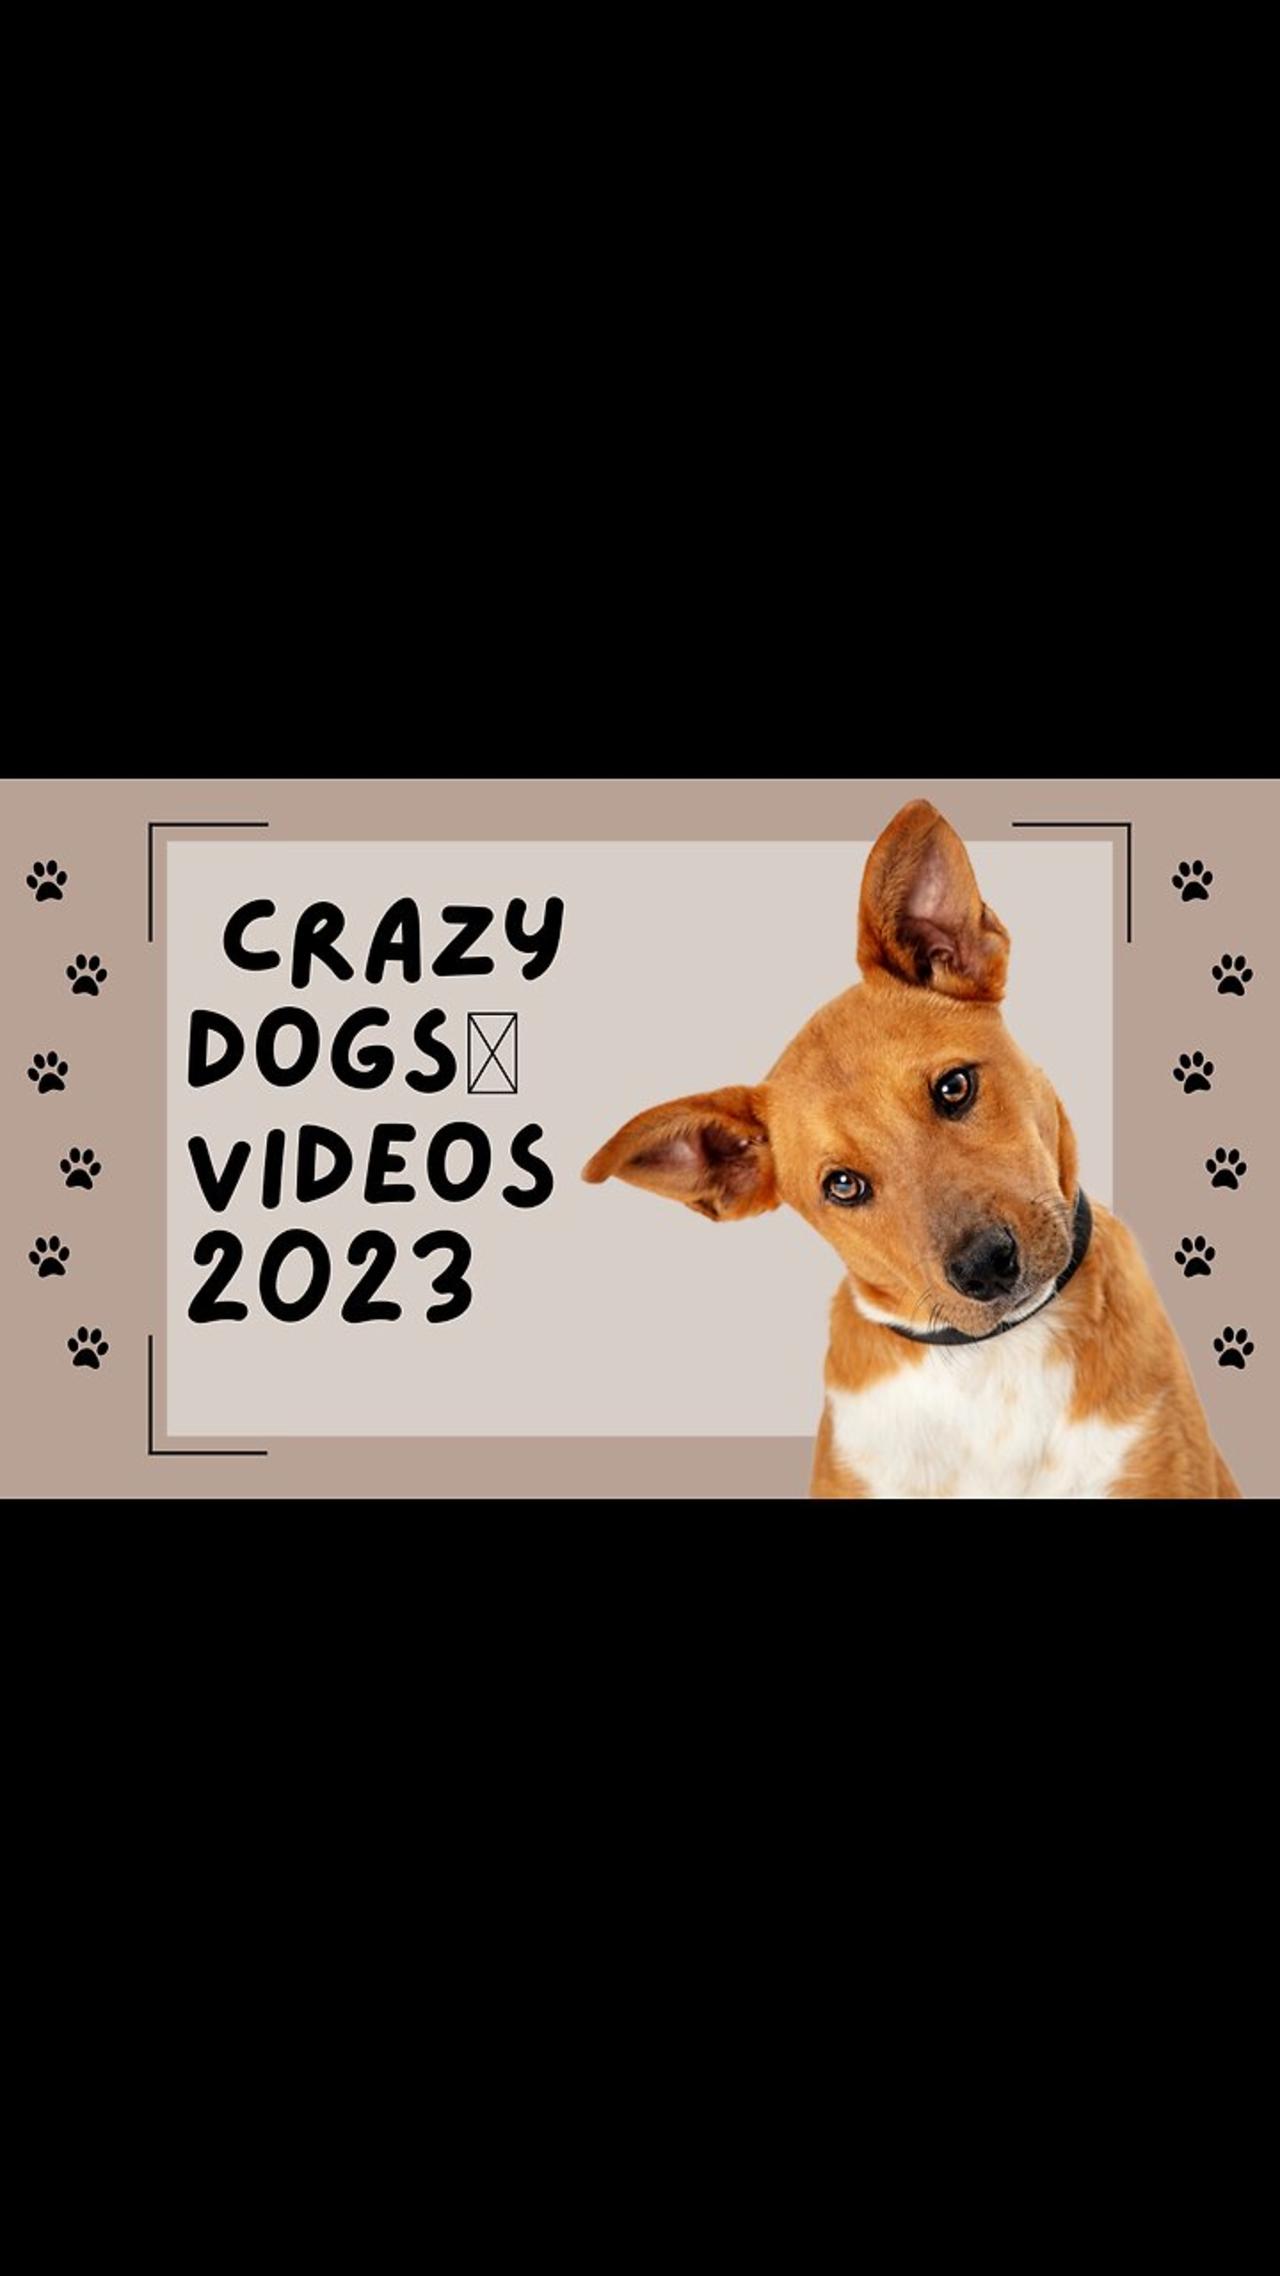 funniest animals videos - and crazy dogs🐶 videos 2023